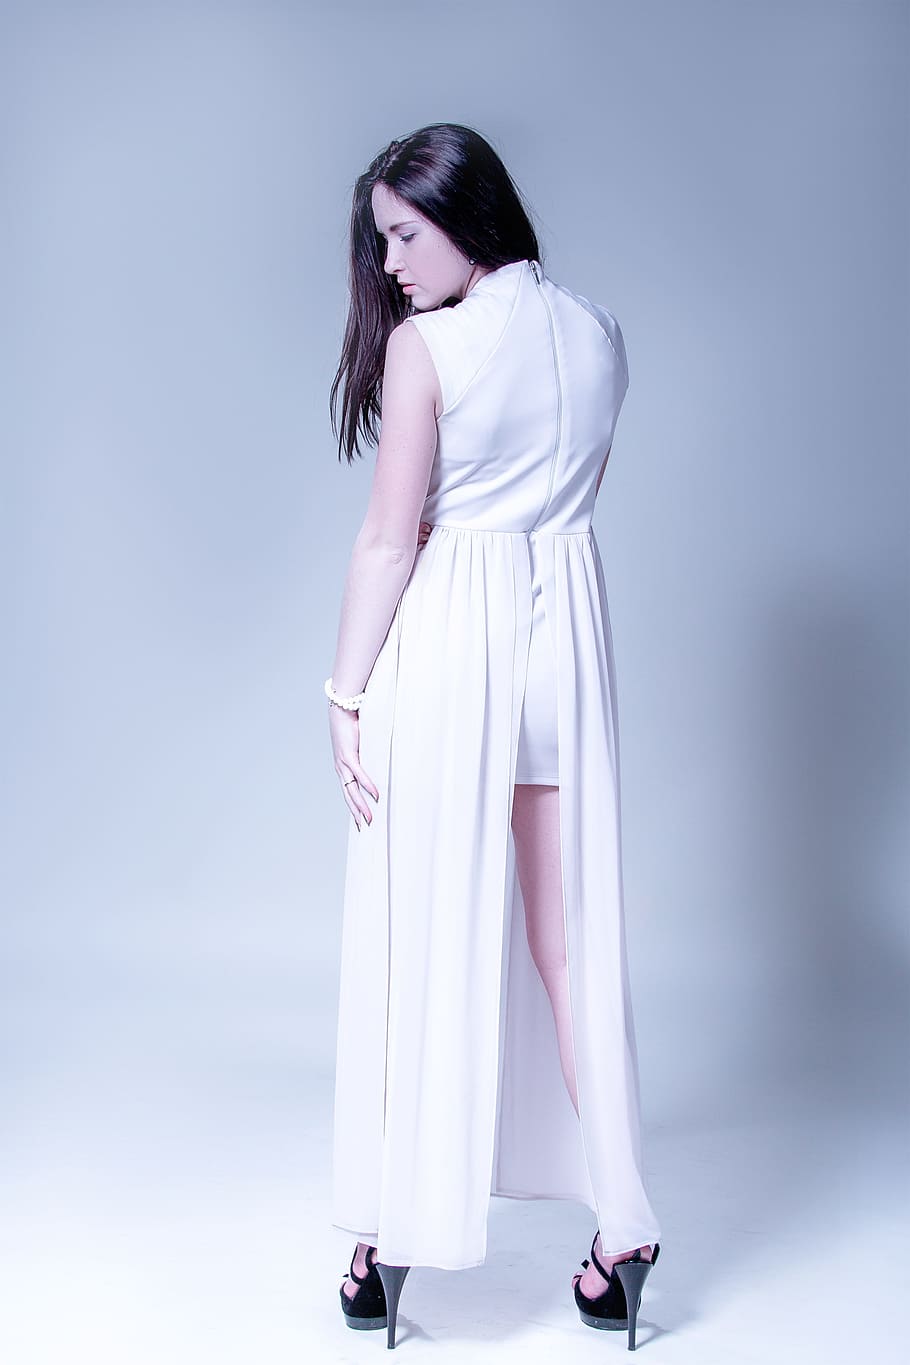 woman wearing white sleeveless long dress with slit and black heeled sandals